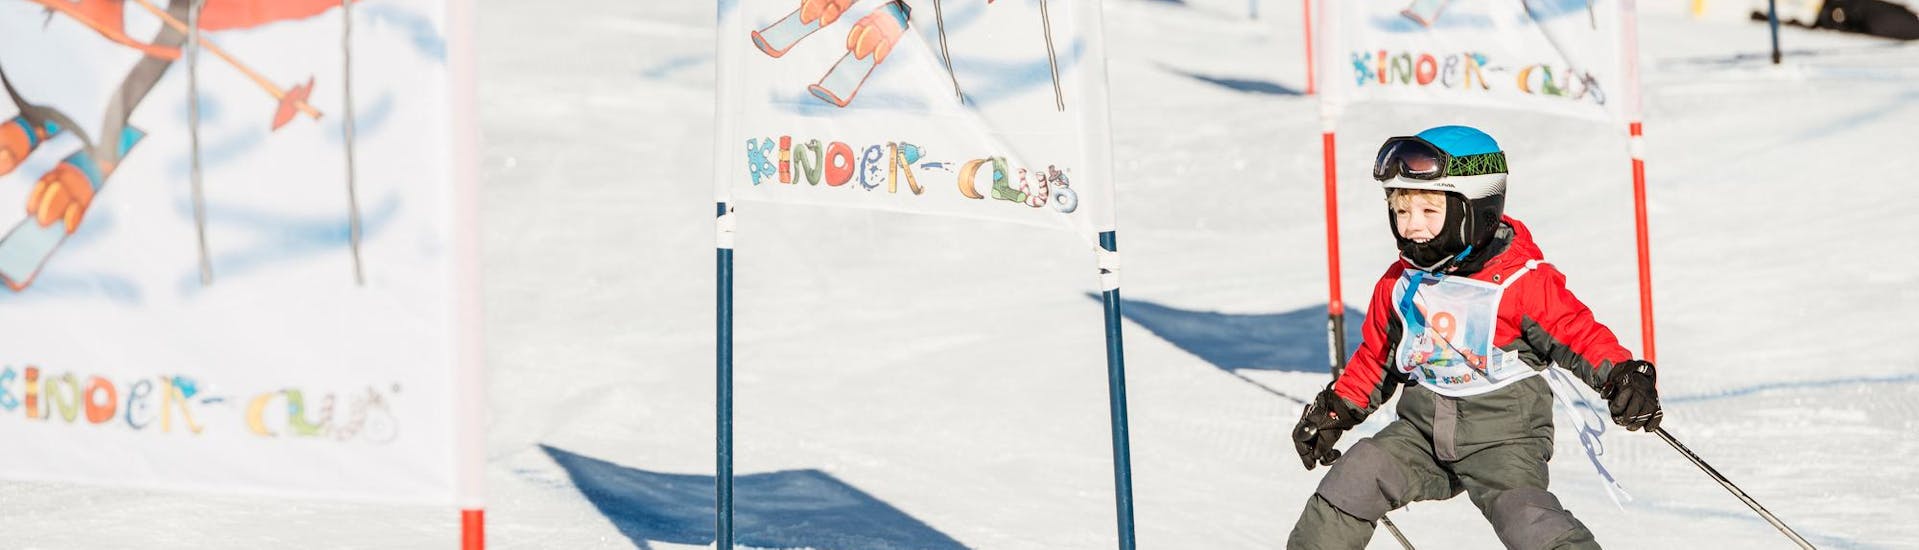 A little skier descends the slope in the Kinderland during the kids ski lessons "BOBO's Kids-Club" for beginners with the Busslehner Achkirch Ski School.